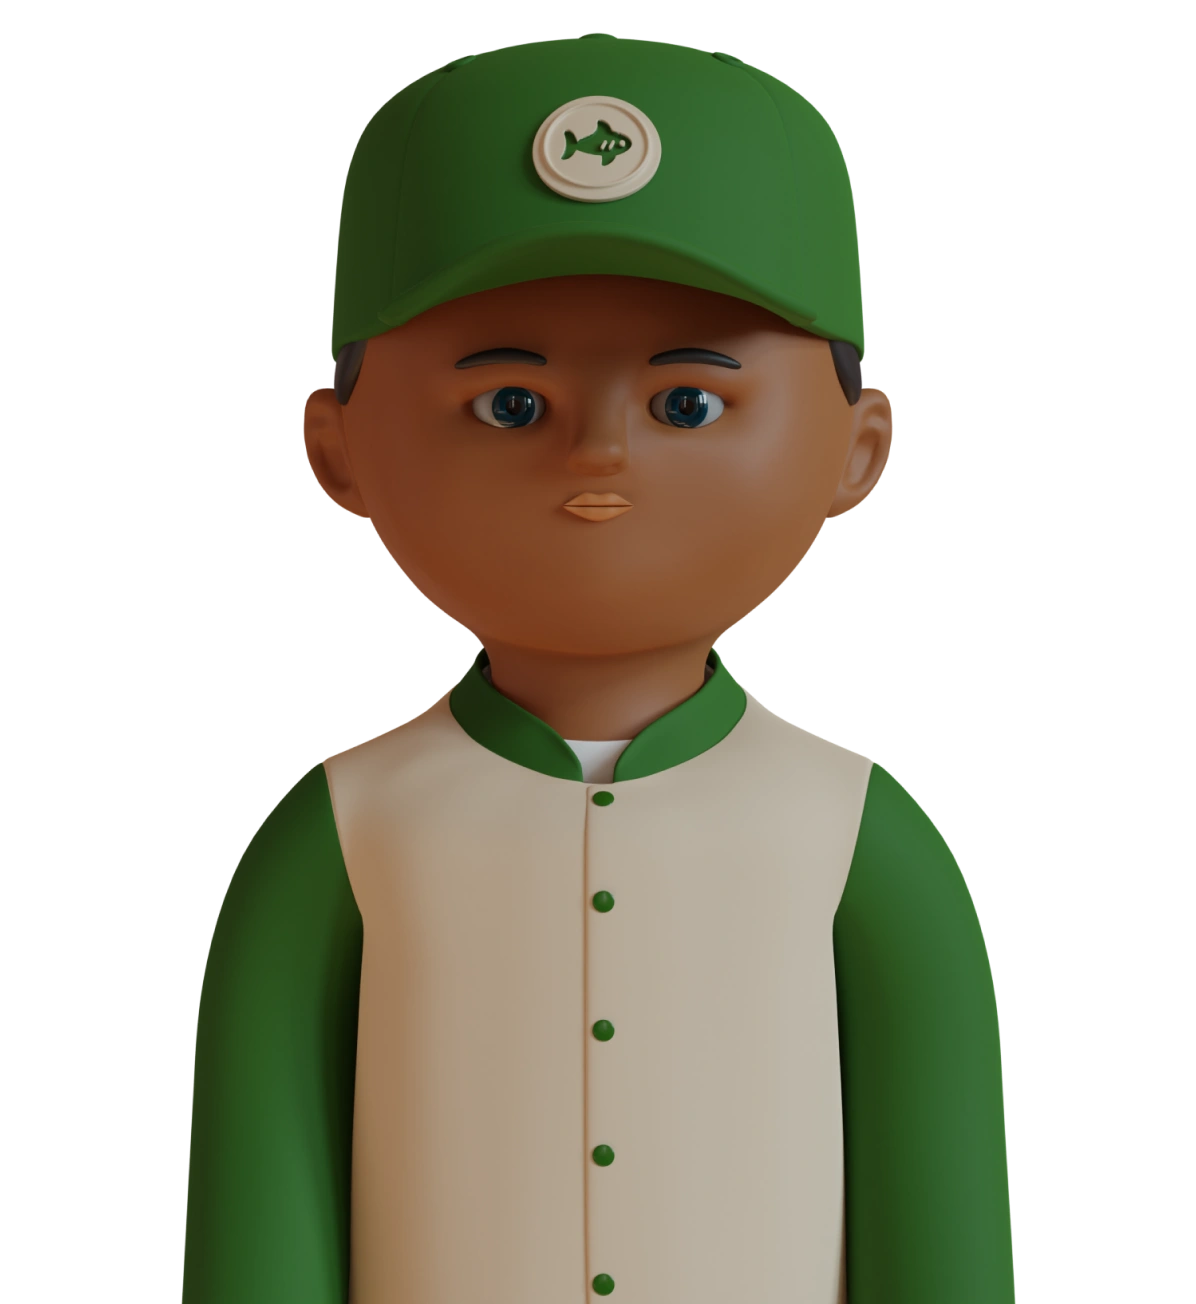 Character with green cap and baseball jersey, buttoned up, digital rendering.